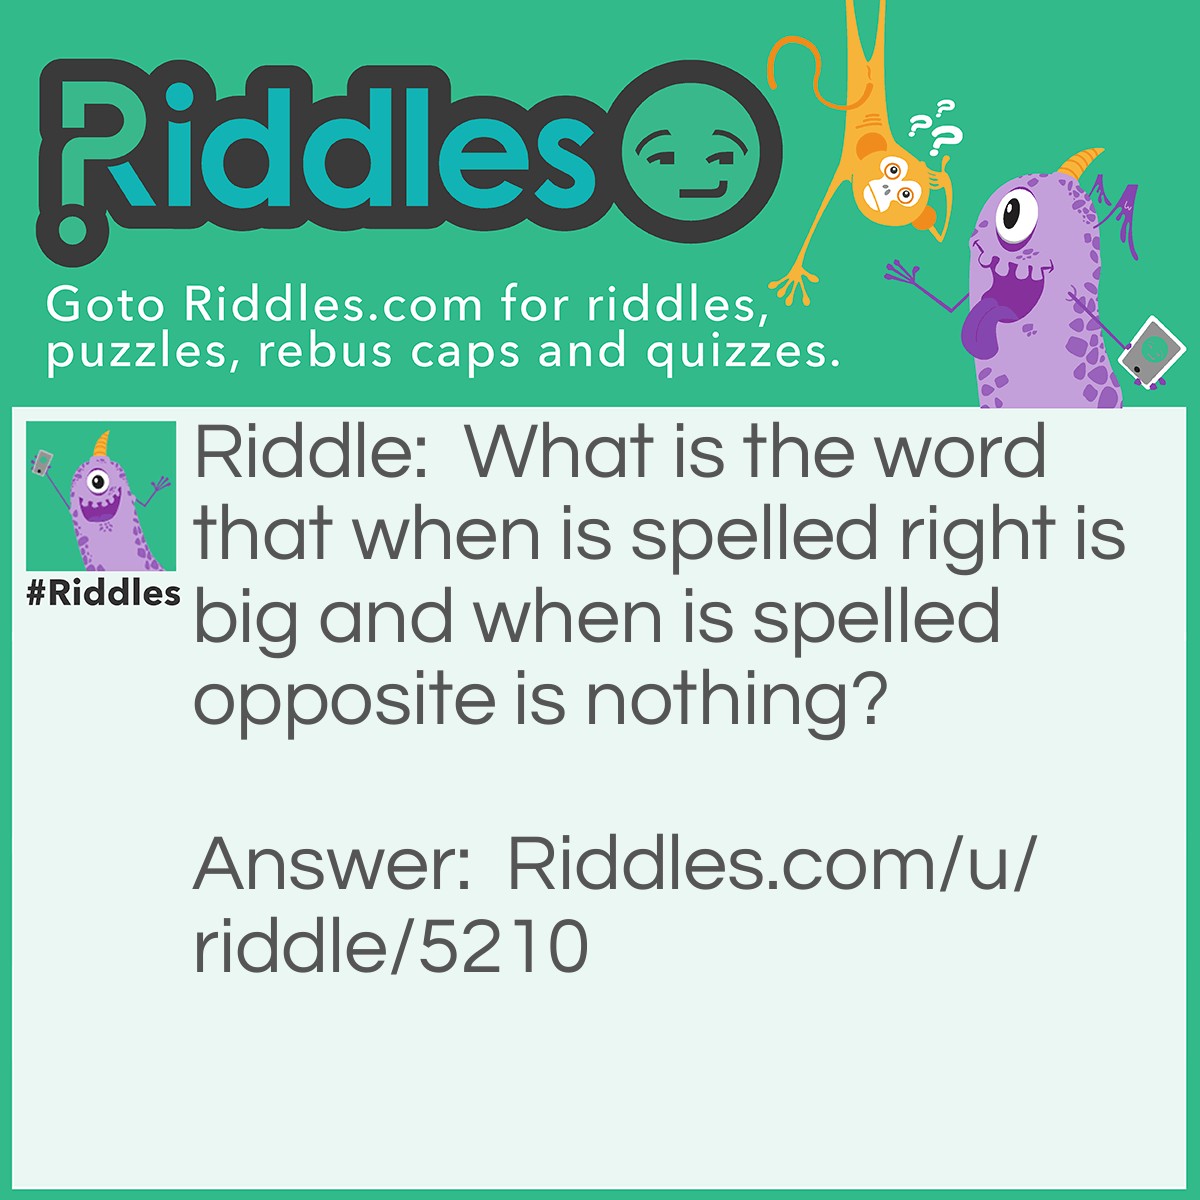 Riddle: What is the word that when is spelled right is big and when is spelled opposite is nothing? Answer: Ton